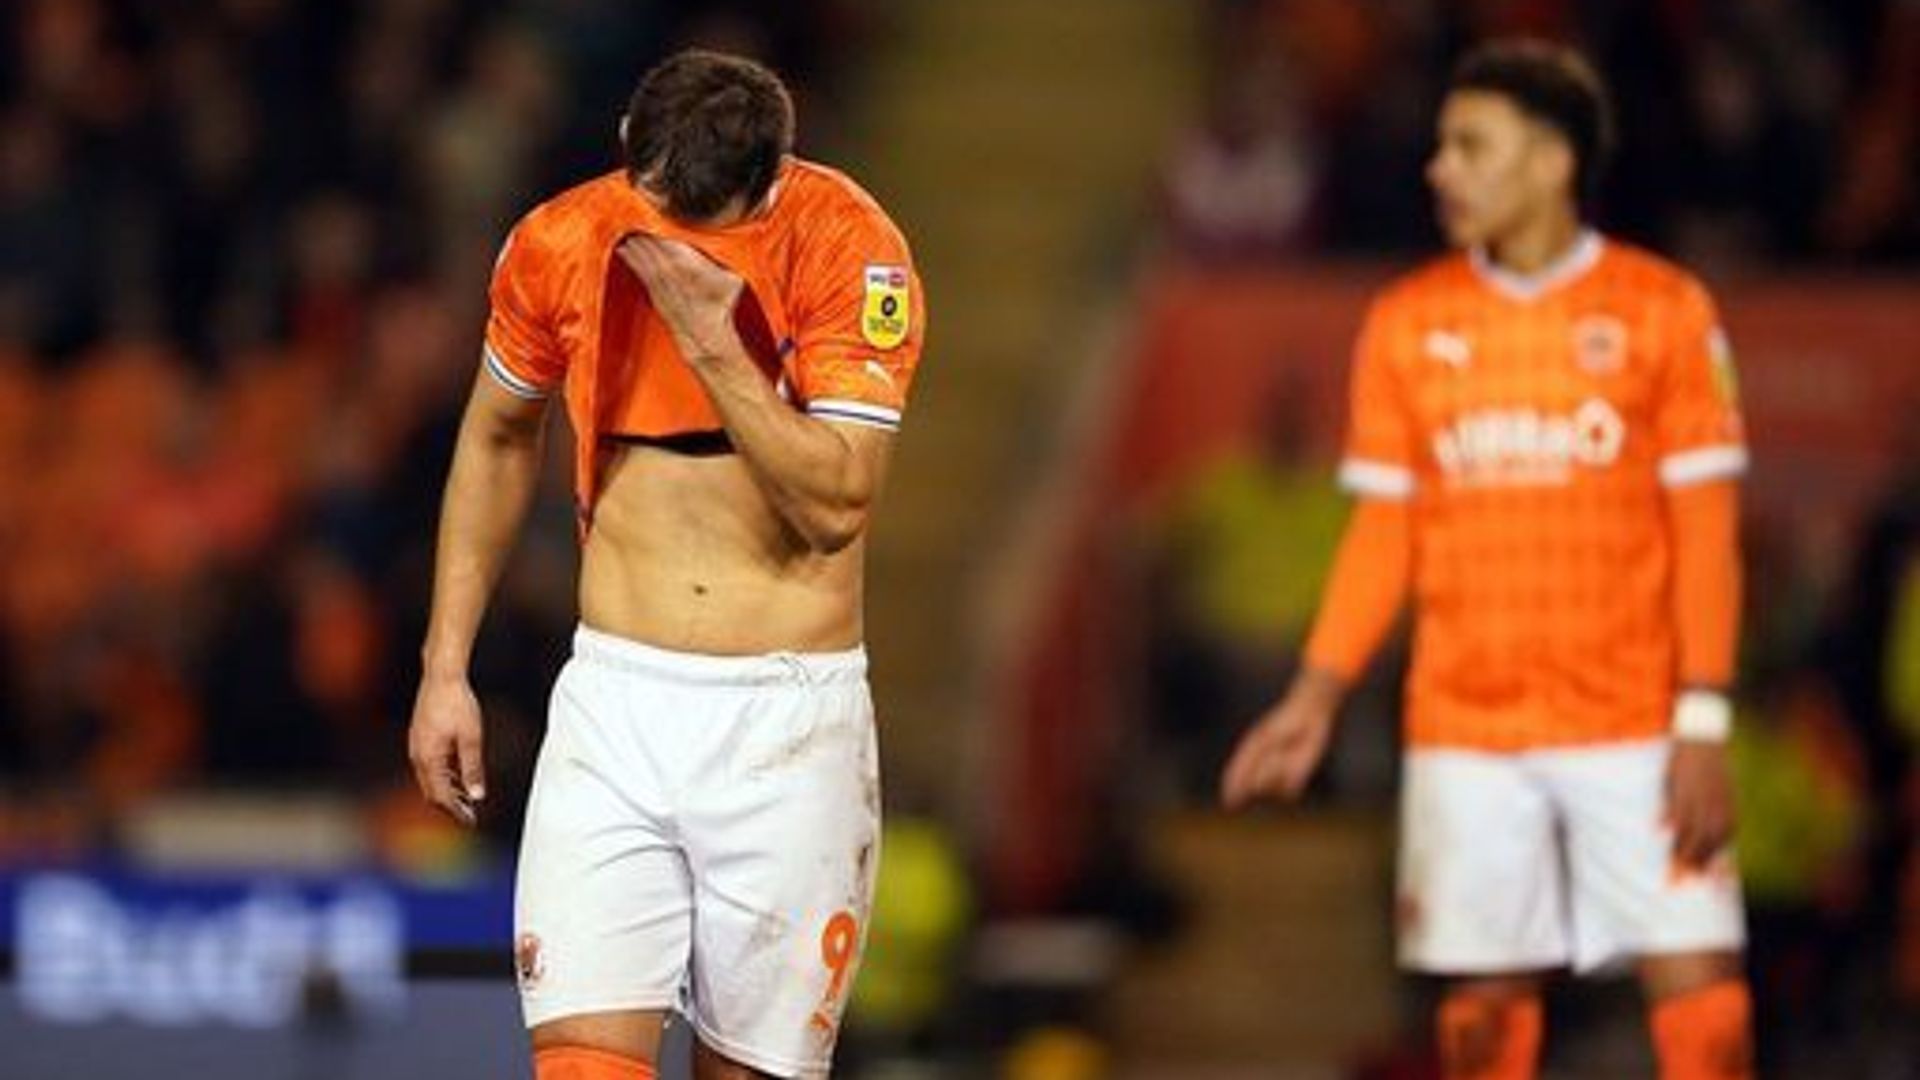 Blackpool relegated to League One after Millwall edge thriller